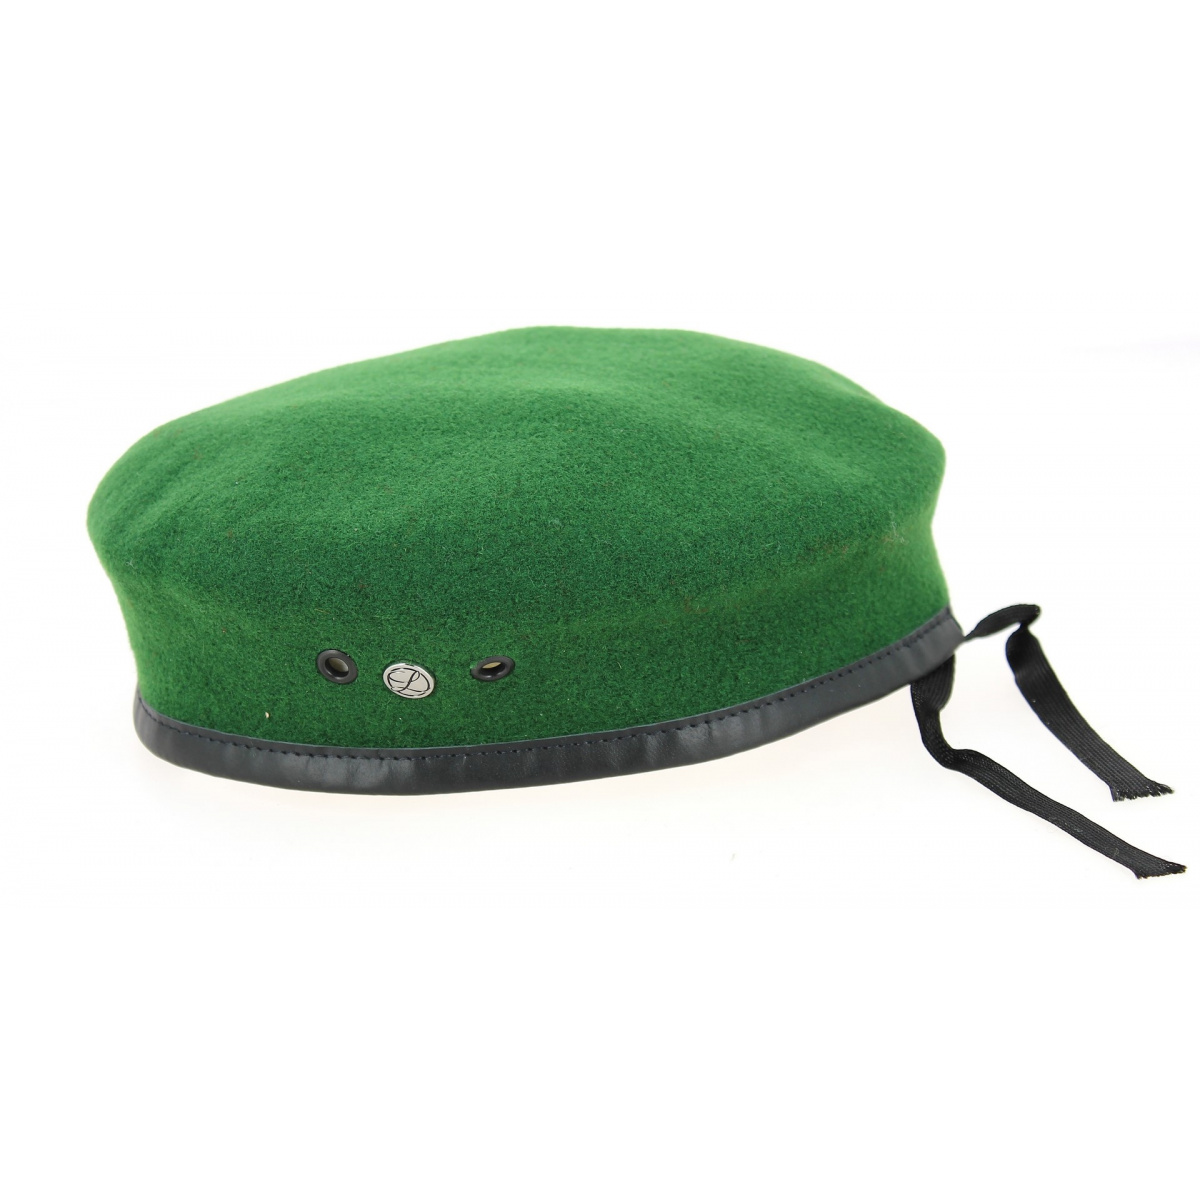 BERET VERT 100 % PURE LAINE TAILLE 61 